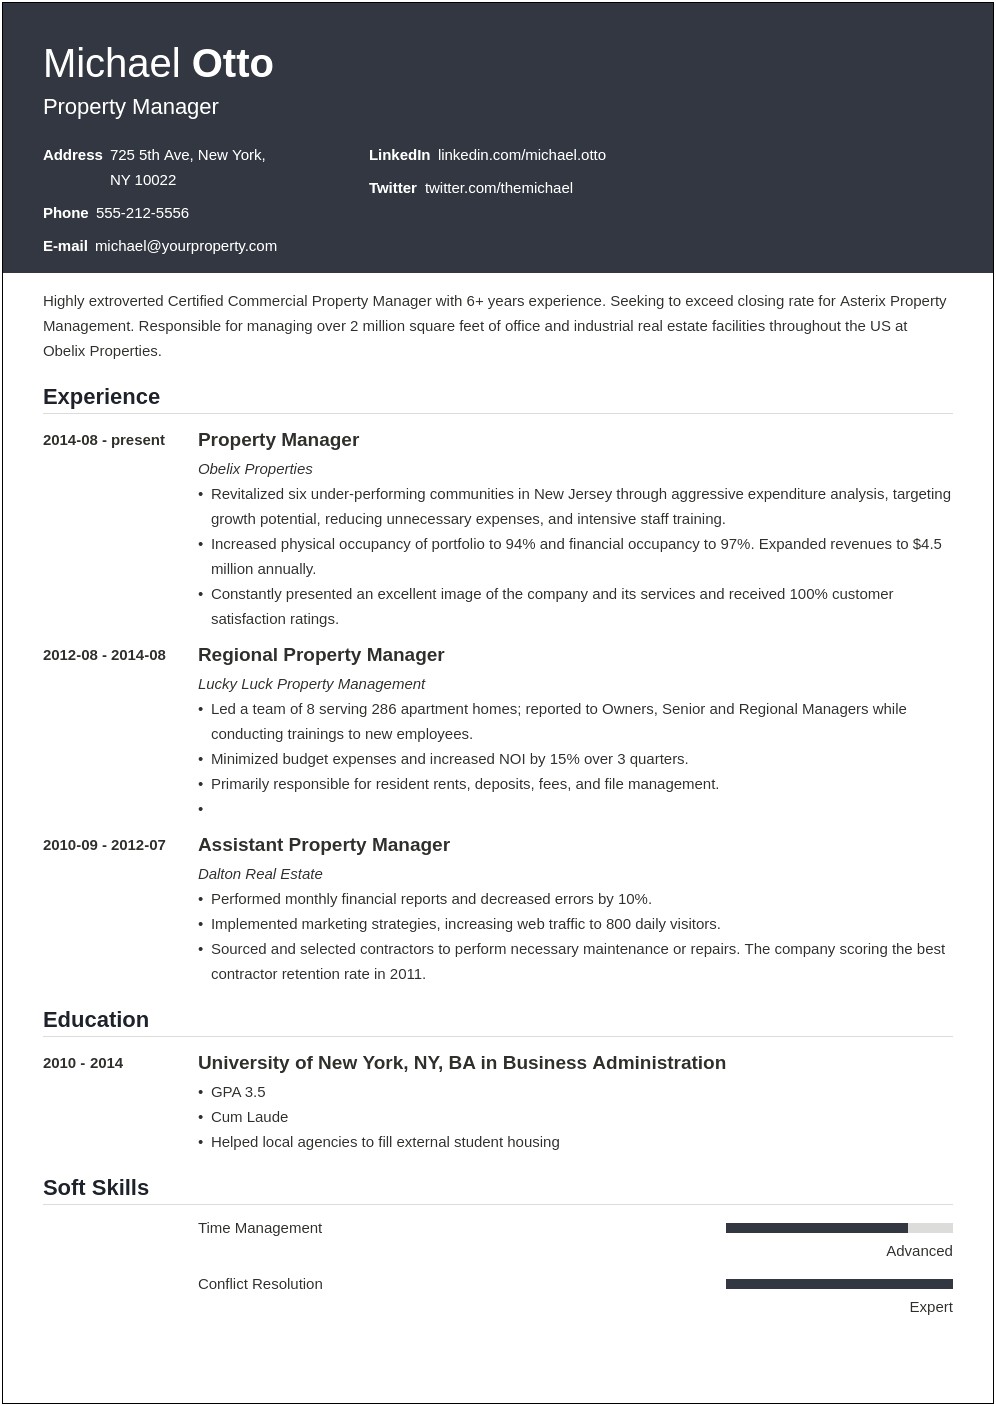 Residential Property Management Assistant Property Manager Resume